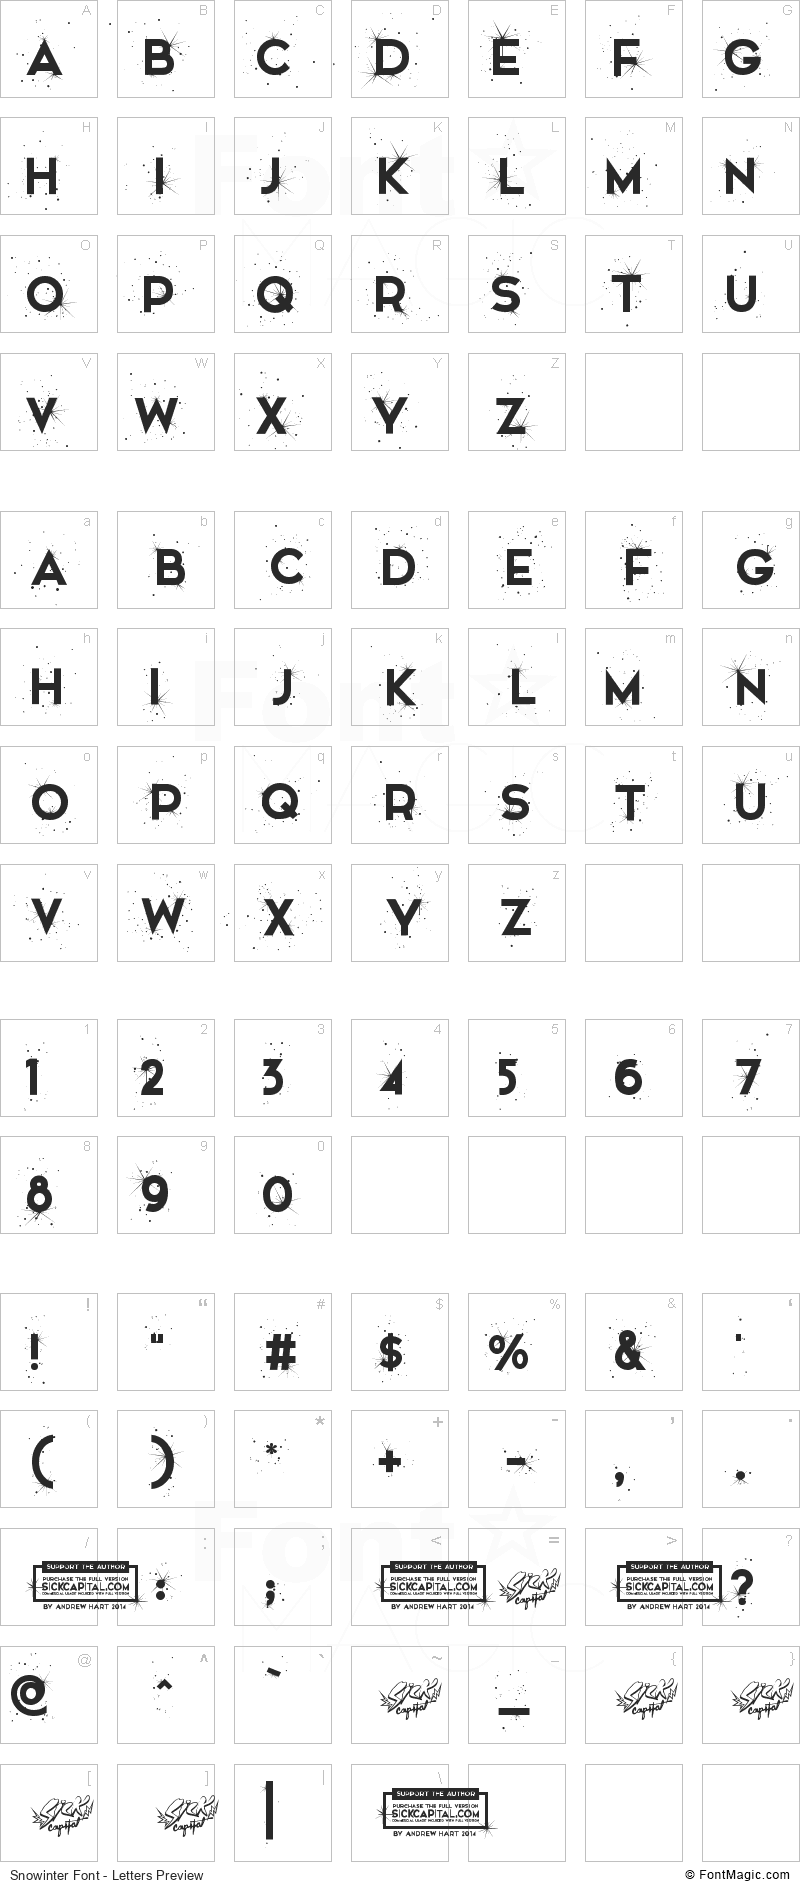 Snowinter Font - All Latters Preview Chart